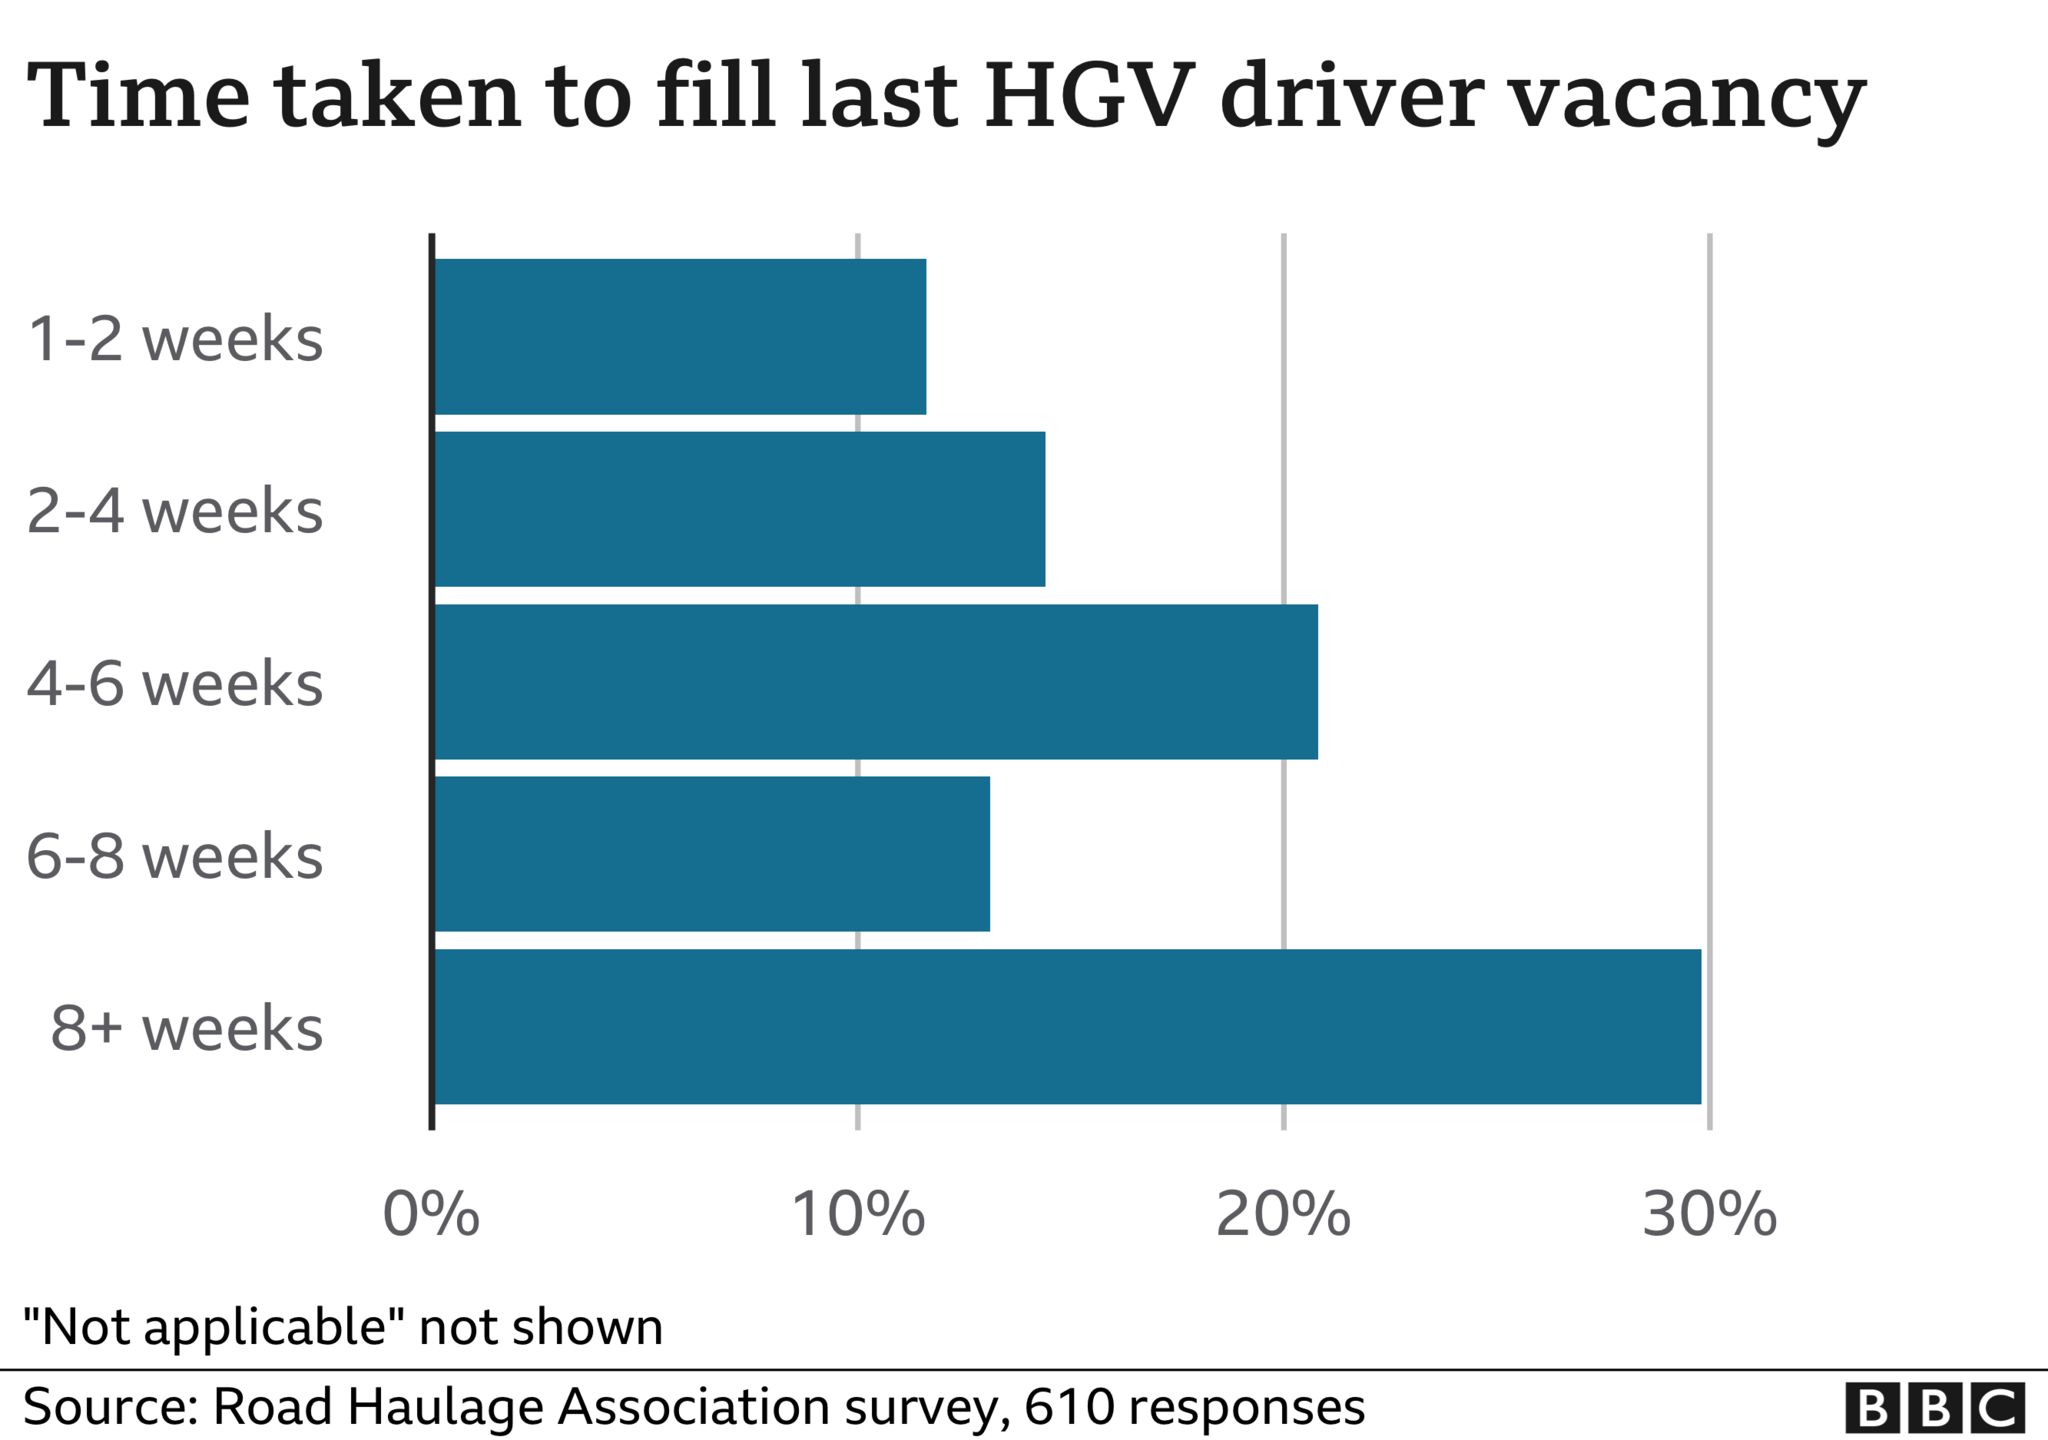 Survey findings showing time taken to fill HGV driver vacancies